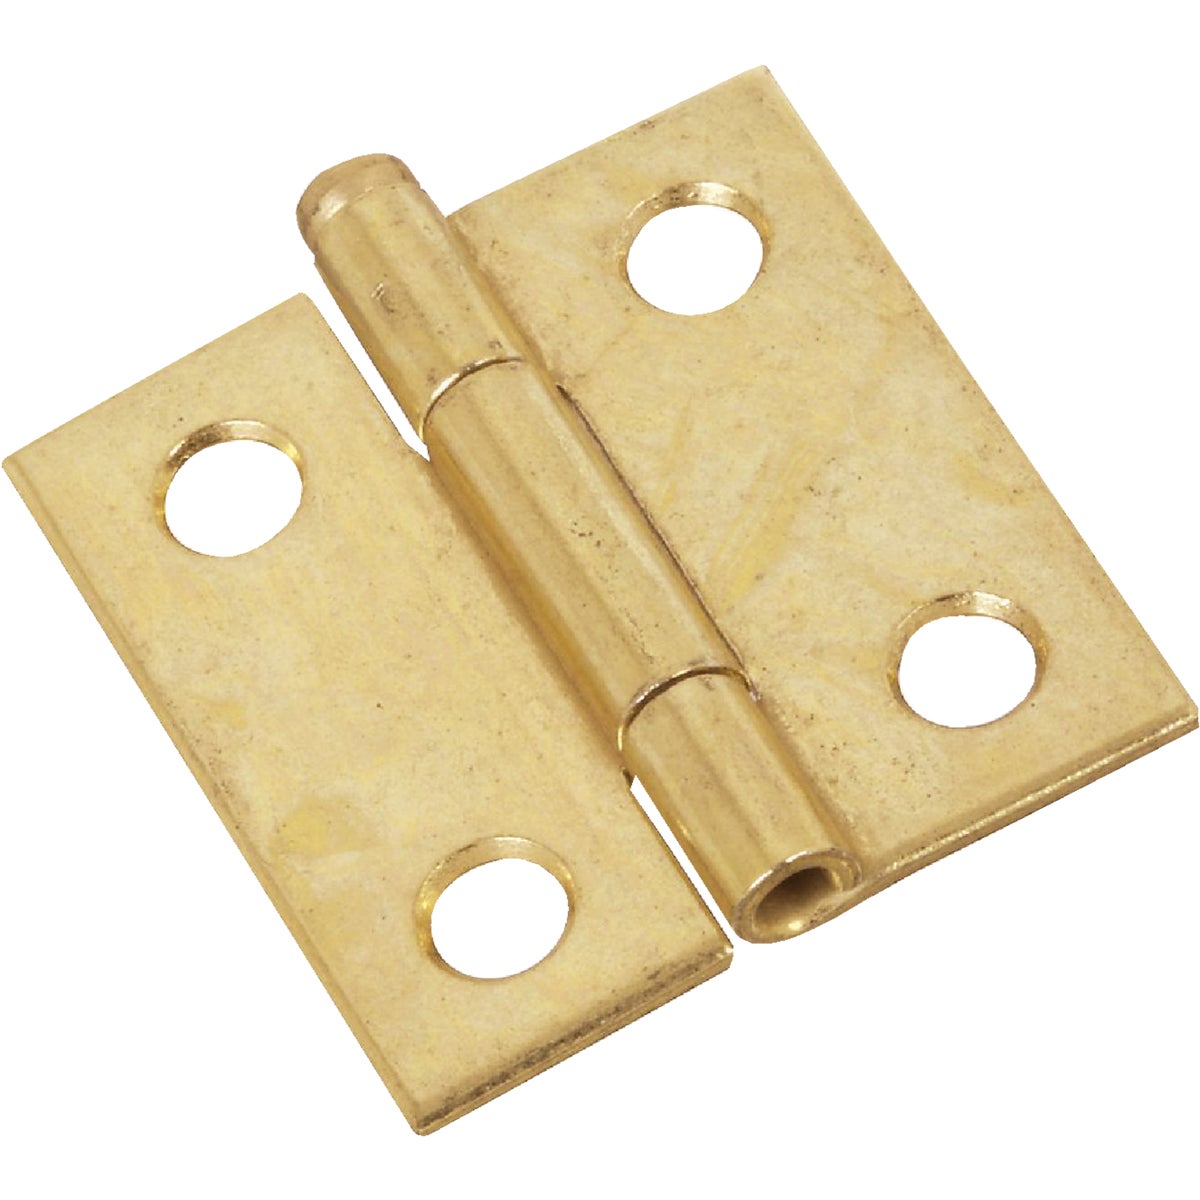 National 1-1/2 In. Brass Loose-Pin Narrow Hinge (2-Pack)